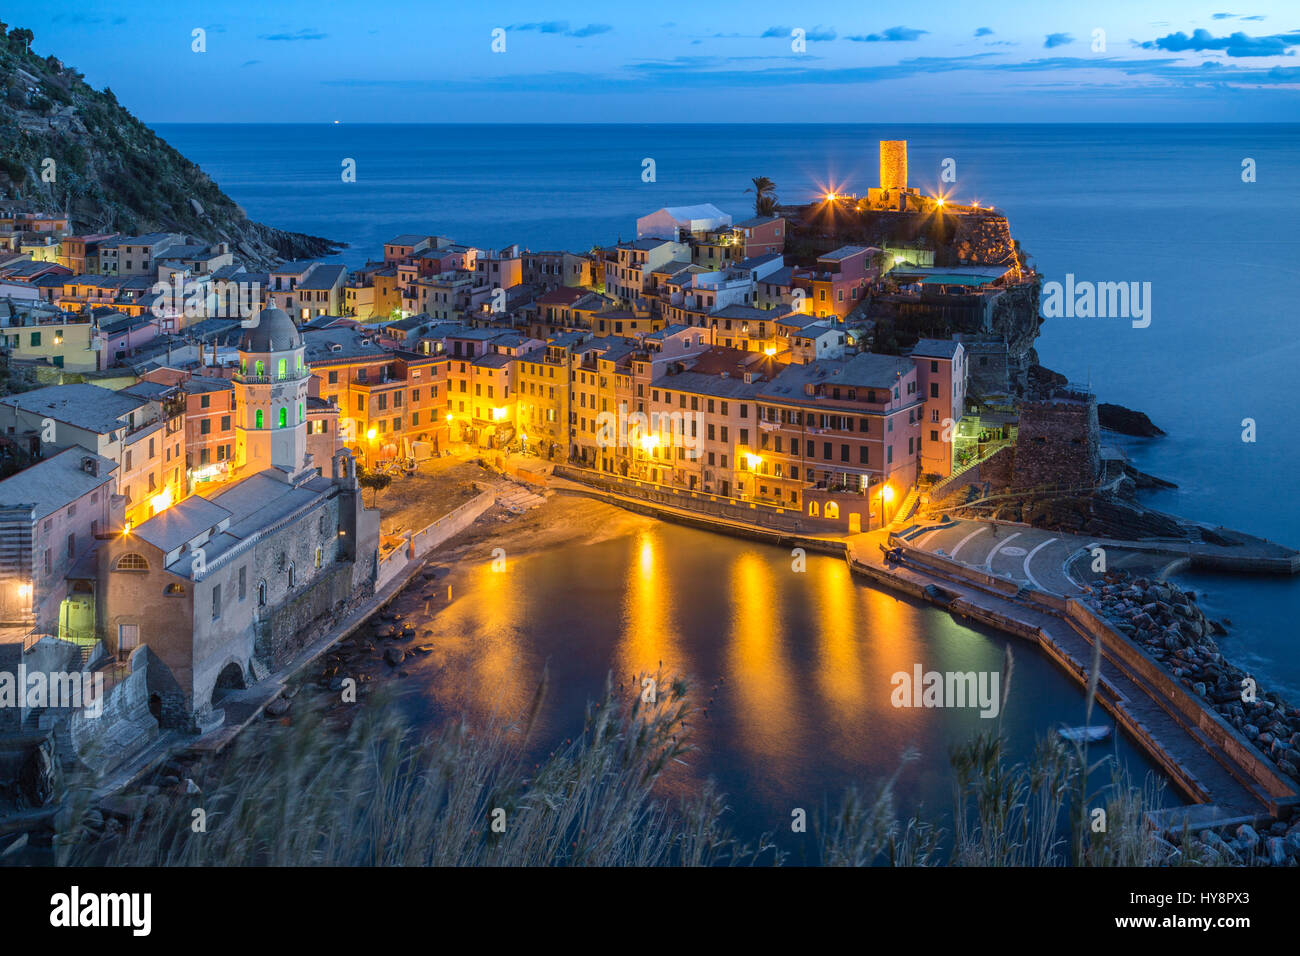 Blue hour in the harbour of the village of Vernazza, Cinque Terre national park, province of La Spezia, Liguria, Italy. Stock Photo